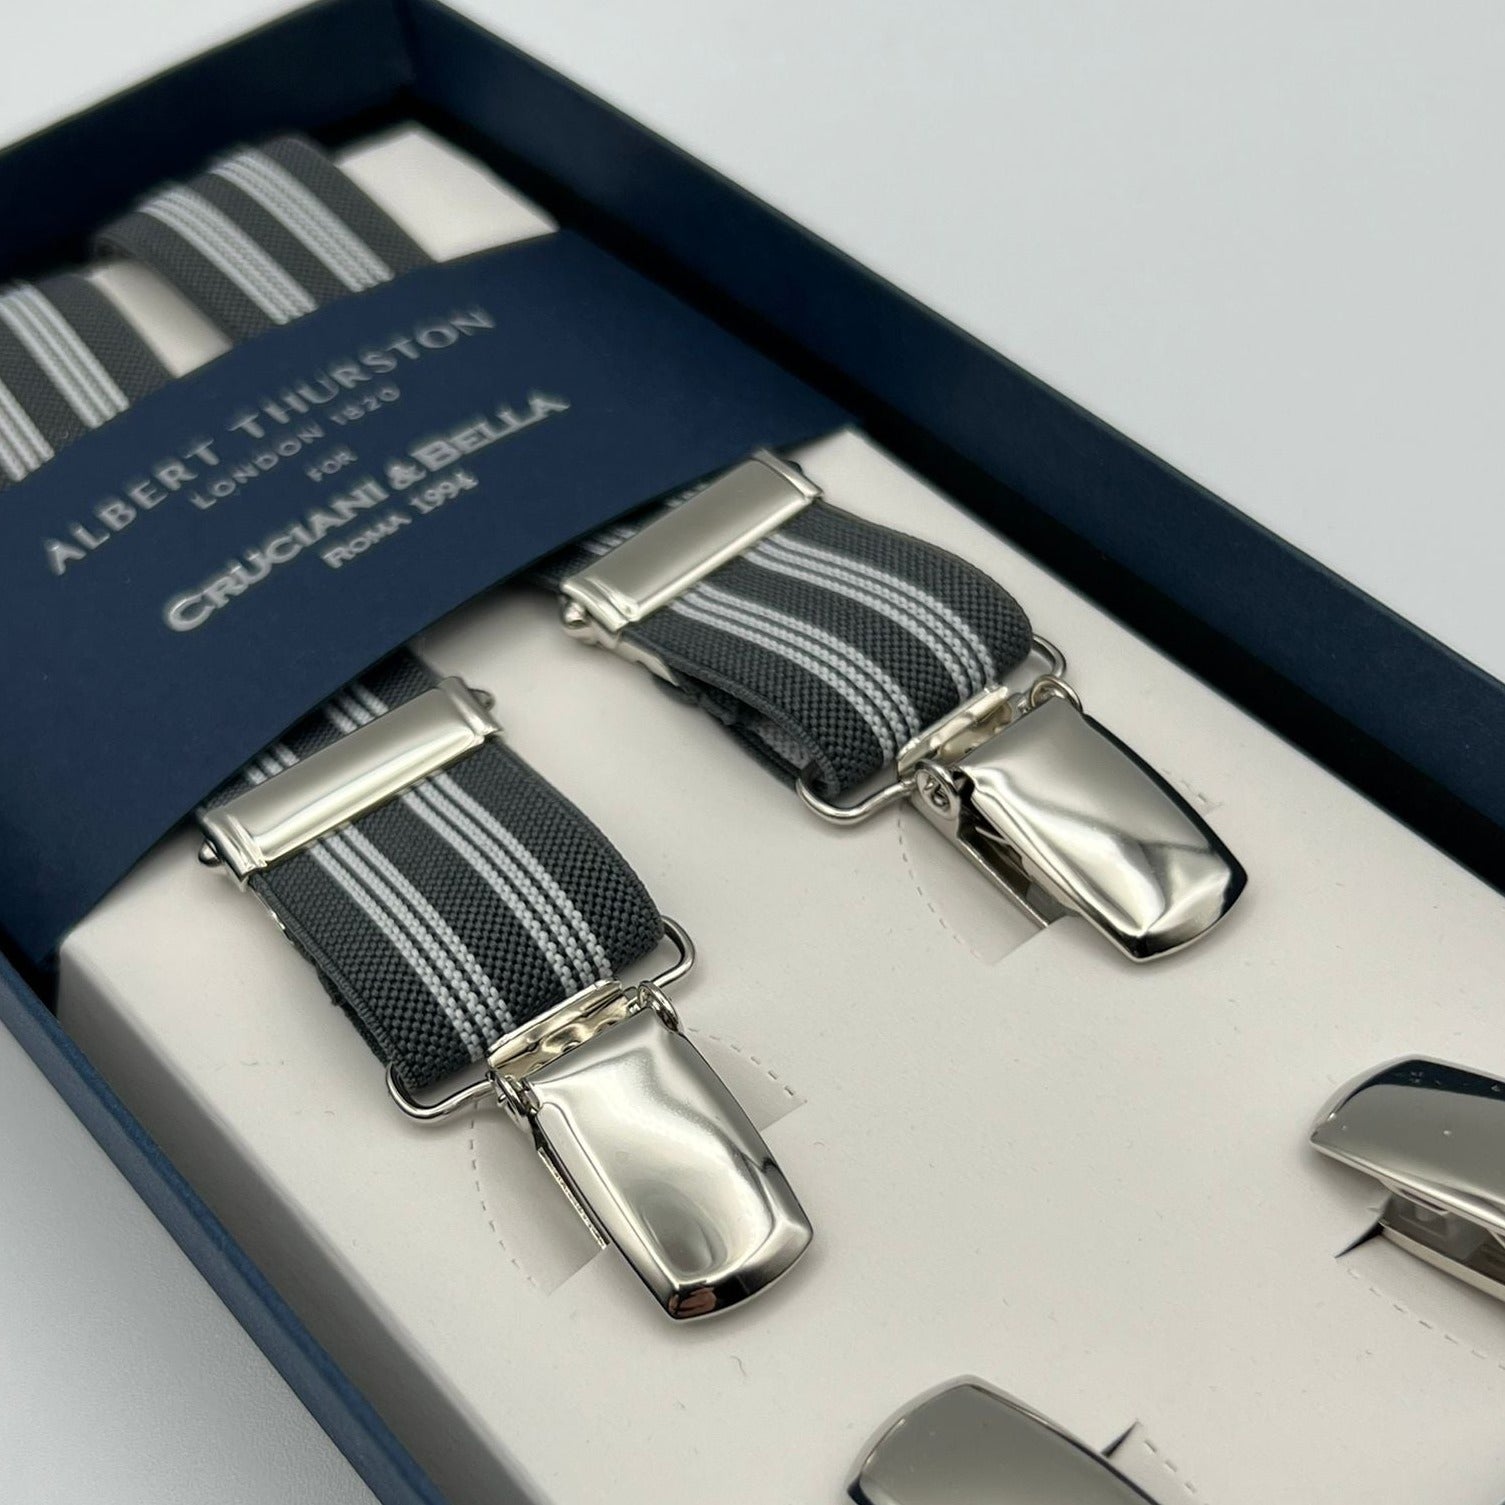 Albert Thurston for Cruciani & Bella Made in England Clip on Adjustable Sizing 25 mm elastic braces Grey, White Stripes X-Shaped Nickel Fittings Size: L #7358